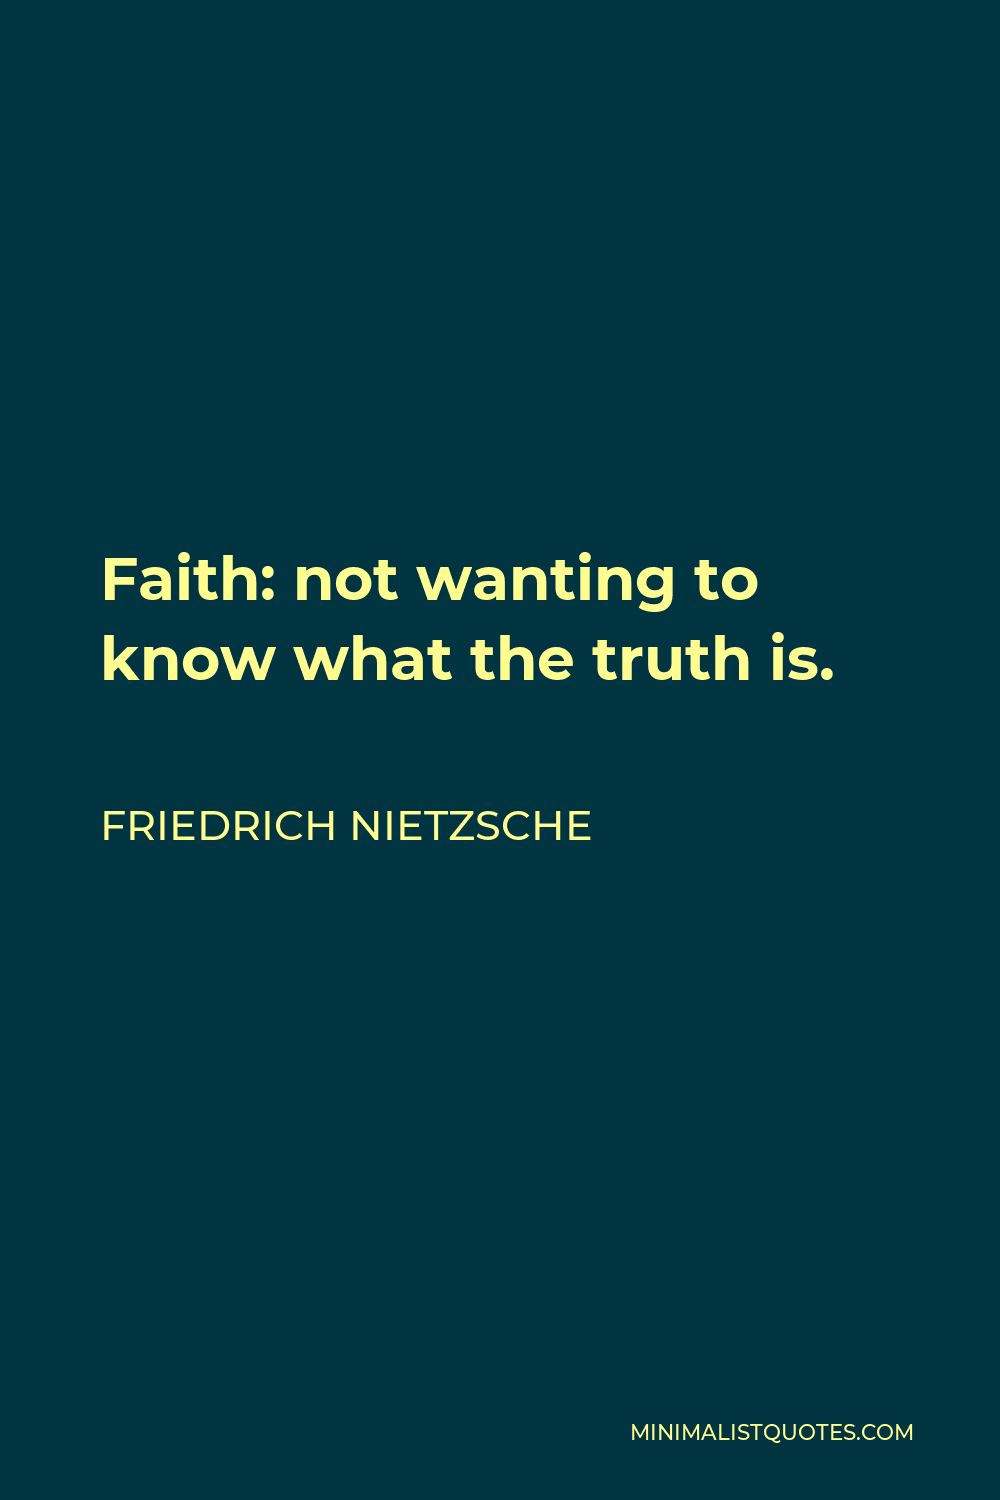 Friedrich Nietzsche Quote - Faith: not wanting to know what the truth is.